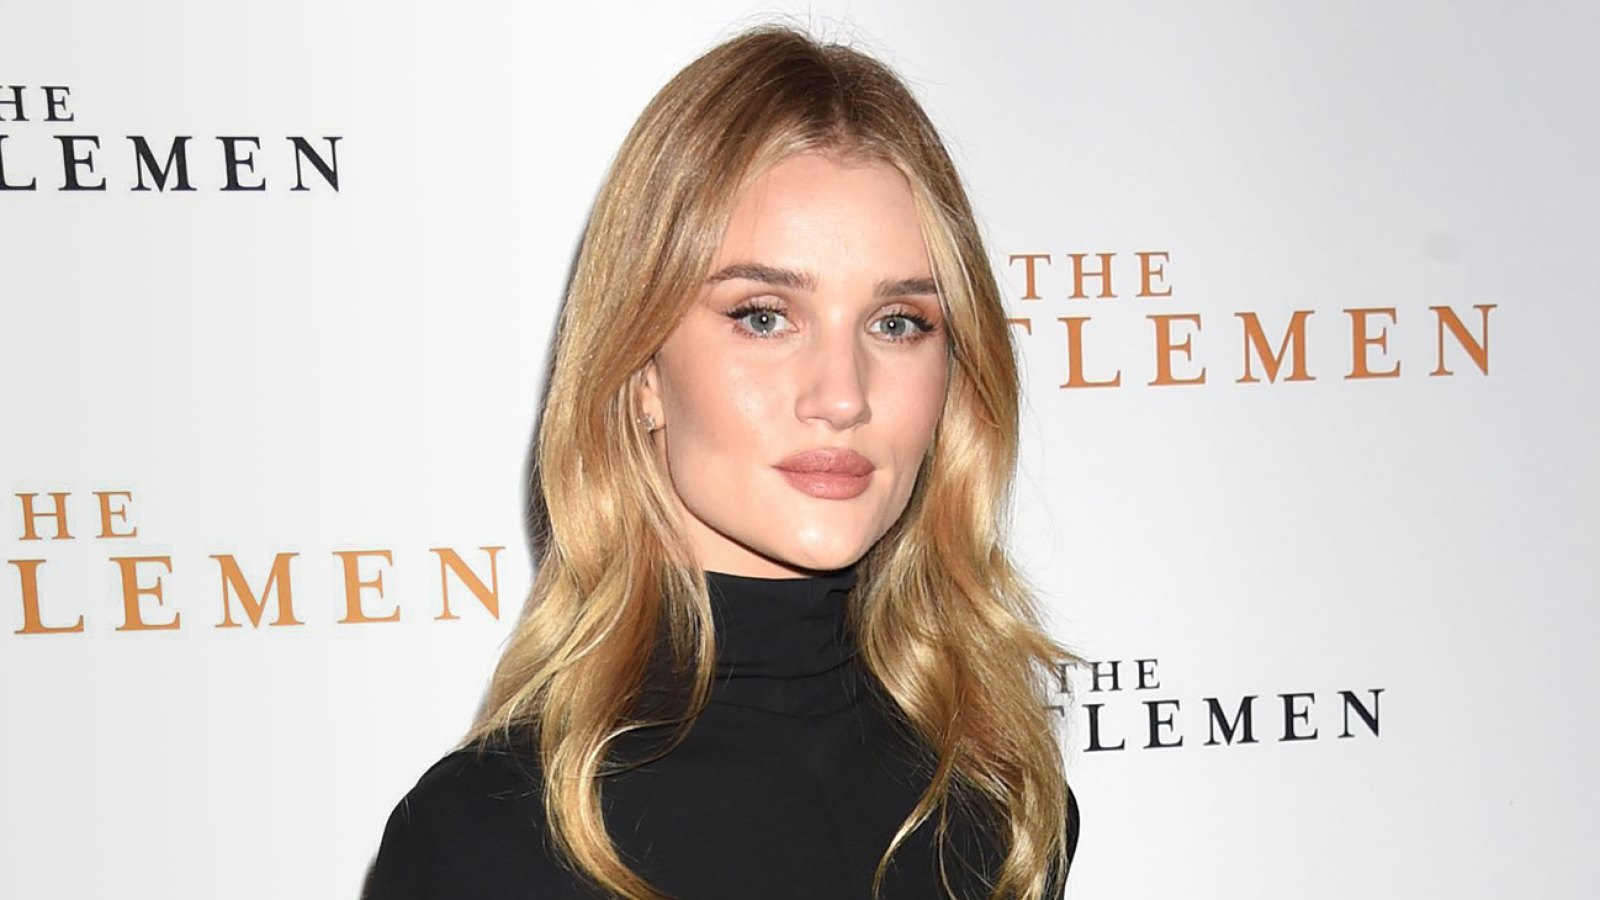 Rosie Huntington-Whiteley Gained 55 Lbs During Pregnancy